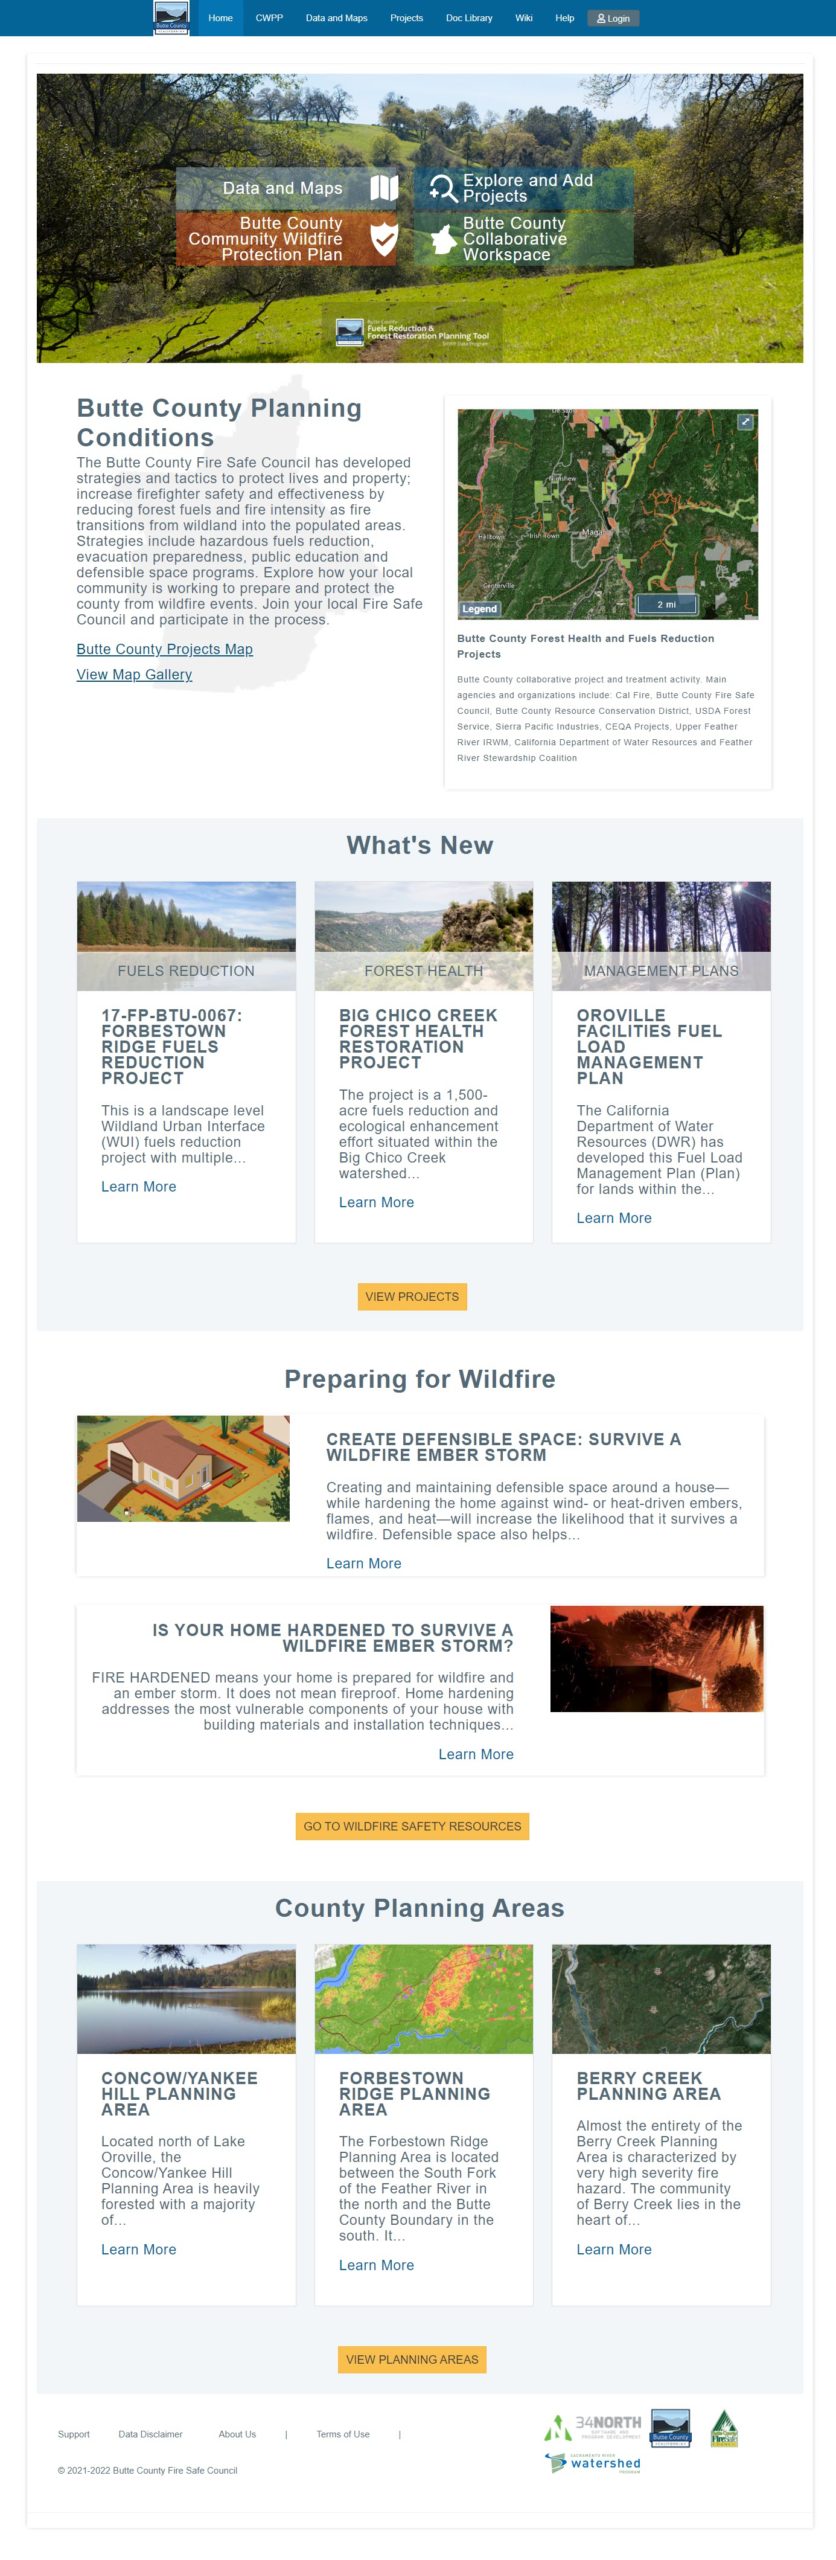 Butte County Fuels Reduction and Forest Restoration Planning Tool Home Page